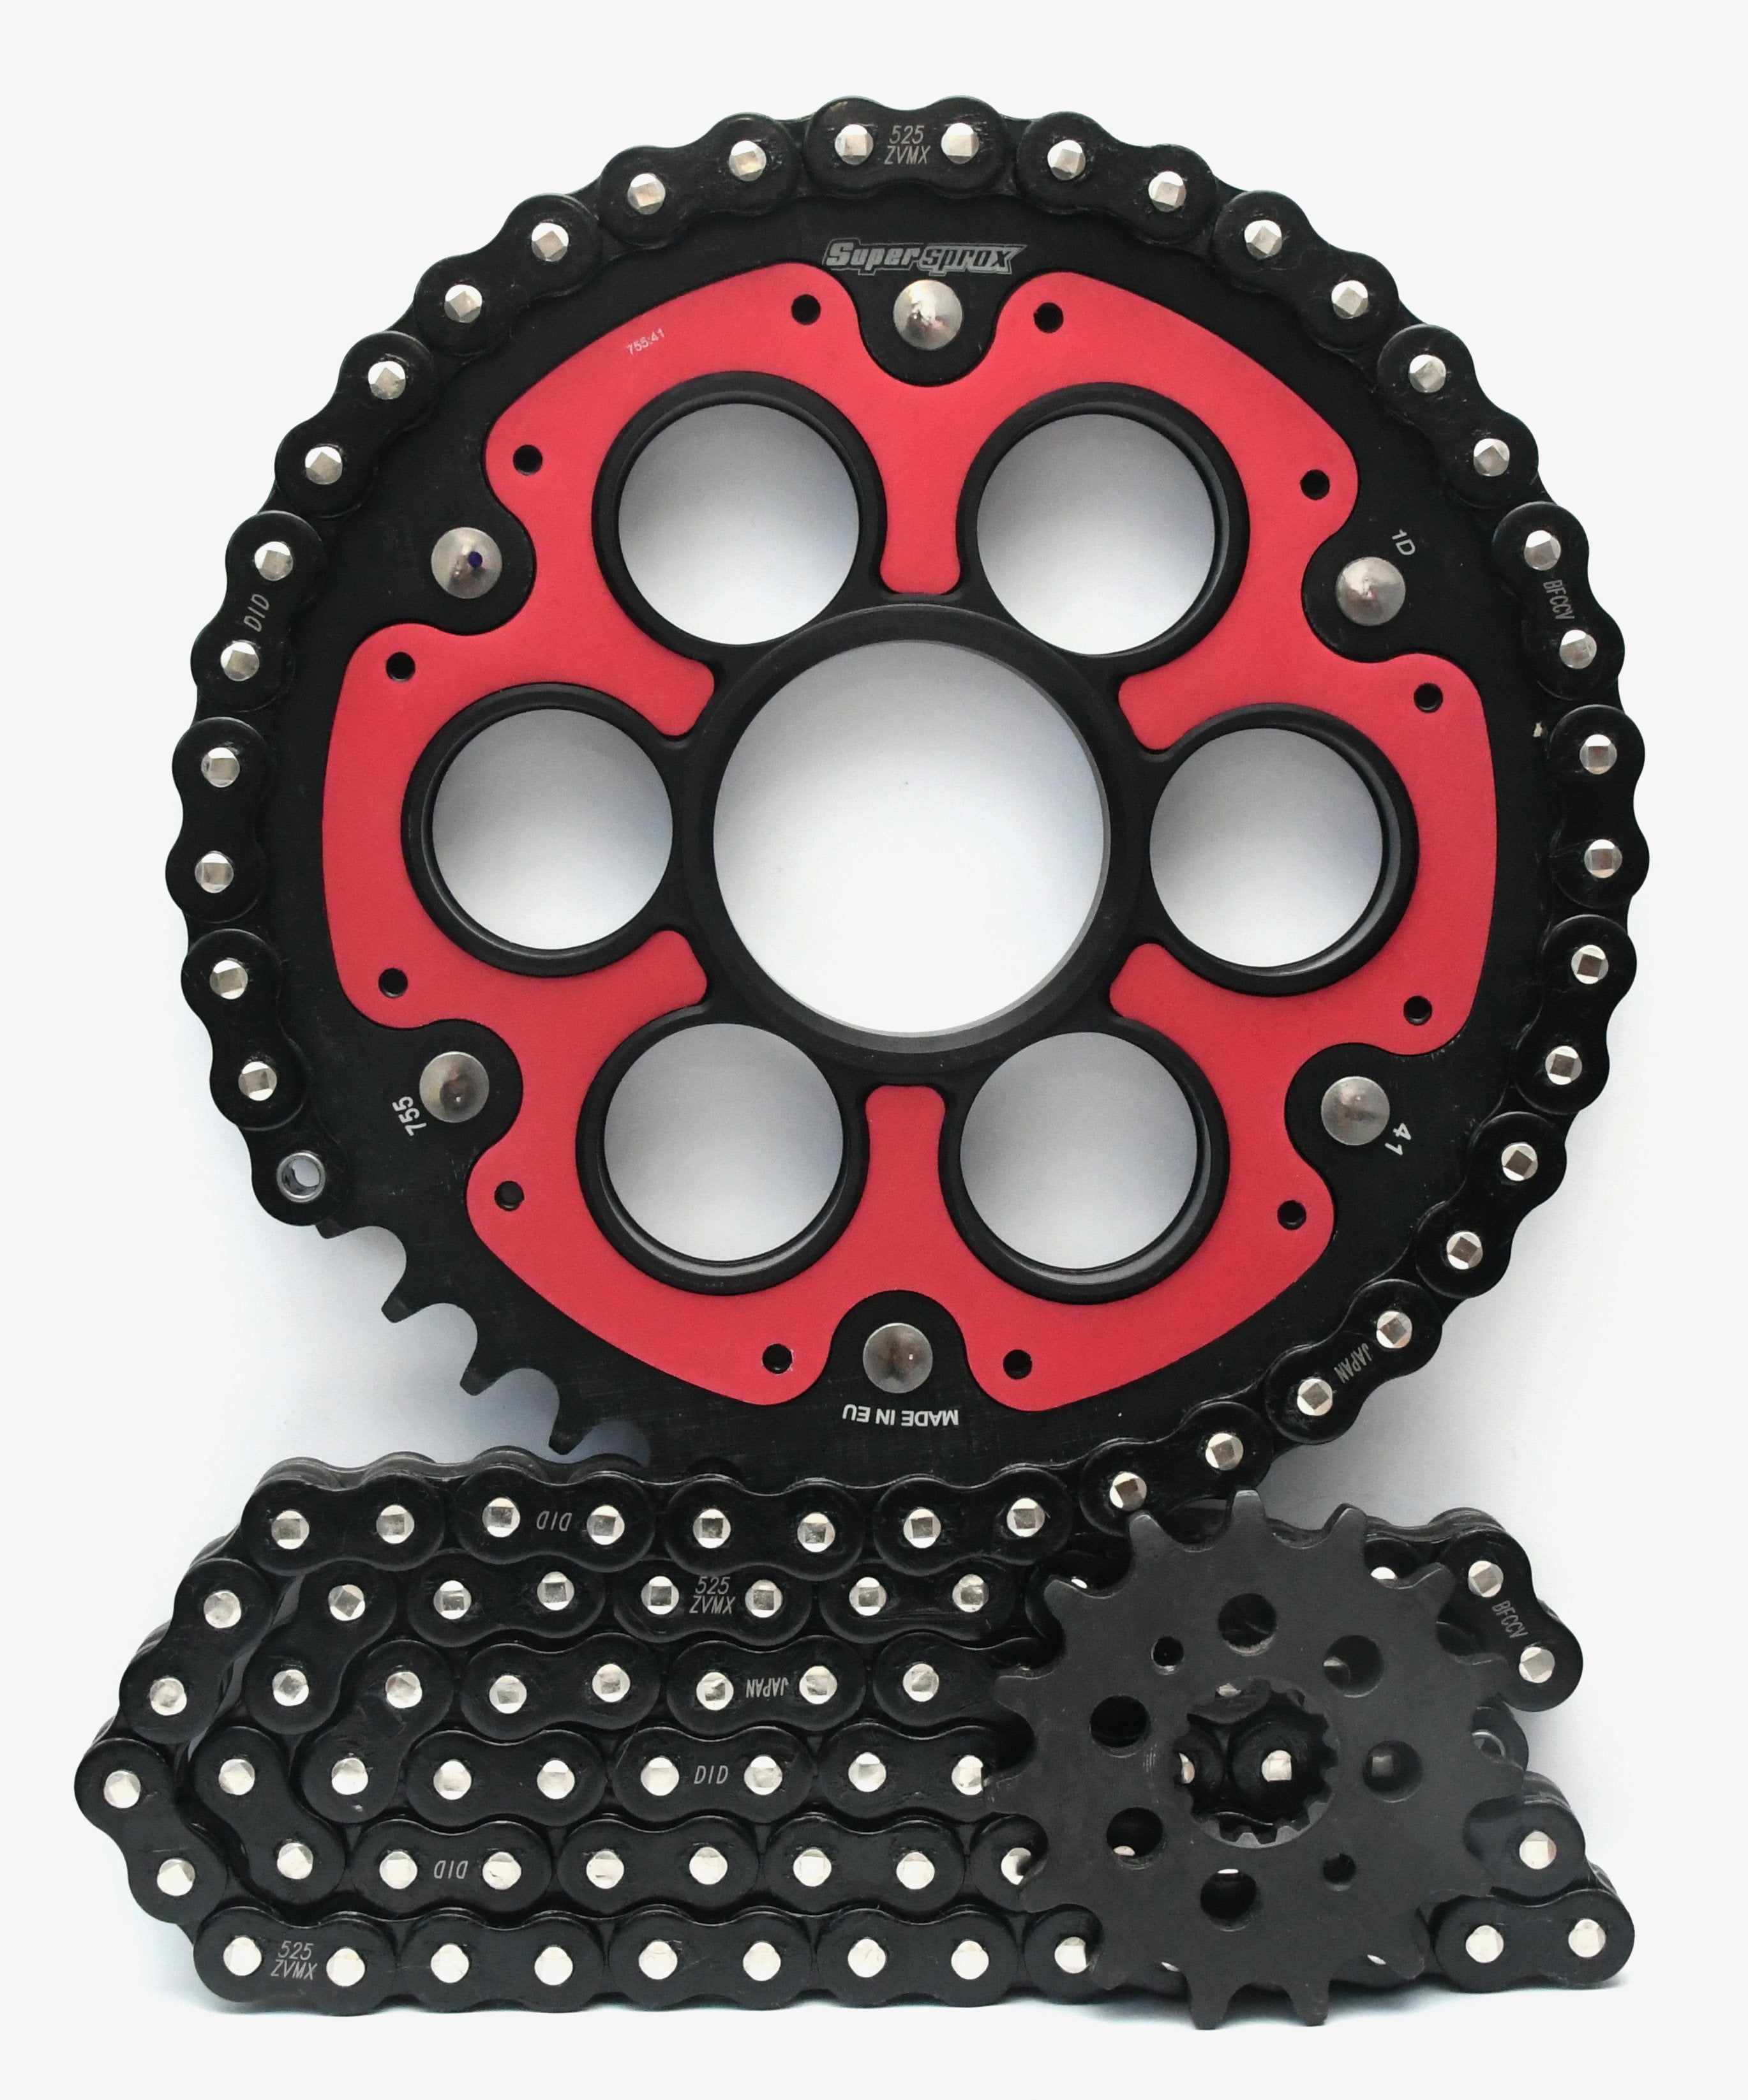 Supersprox Chain & Sprocket Kit for Ducati 1098 and 1198 - Standard Gearing